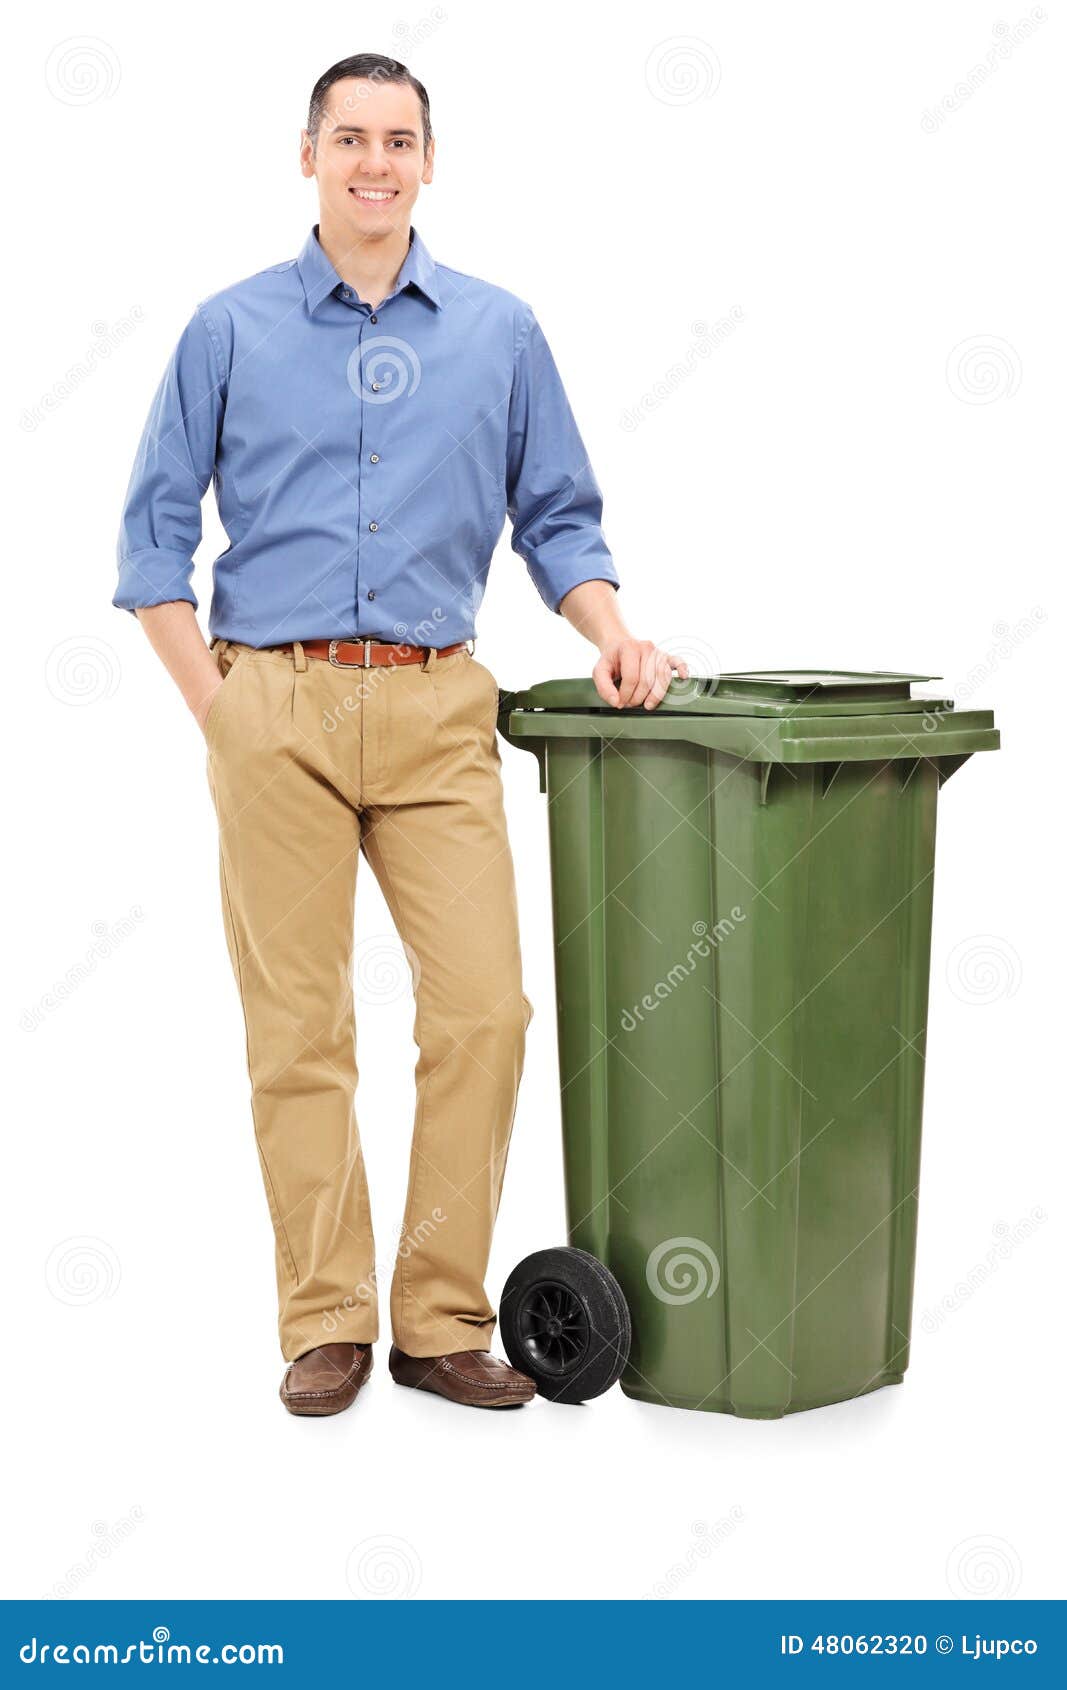 https://thumbs.dreamstime.com/z/young-man-standing-large-green-trash-can-full-length-portrait-isolated-white-background-48062320.jpg